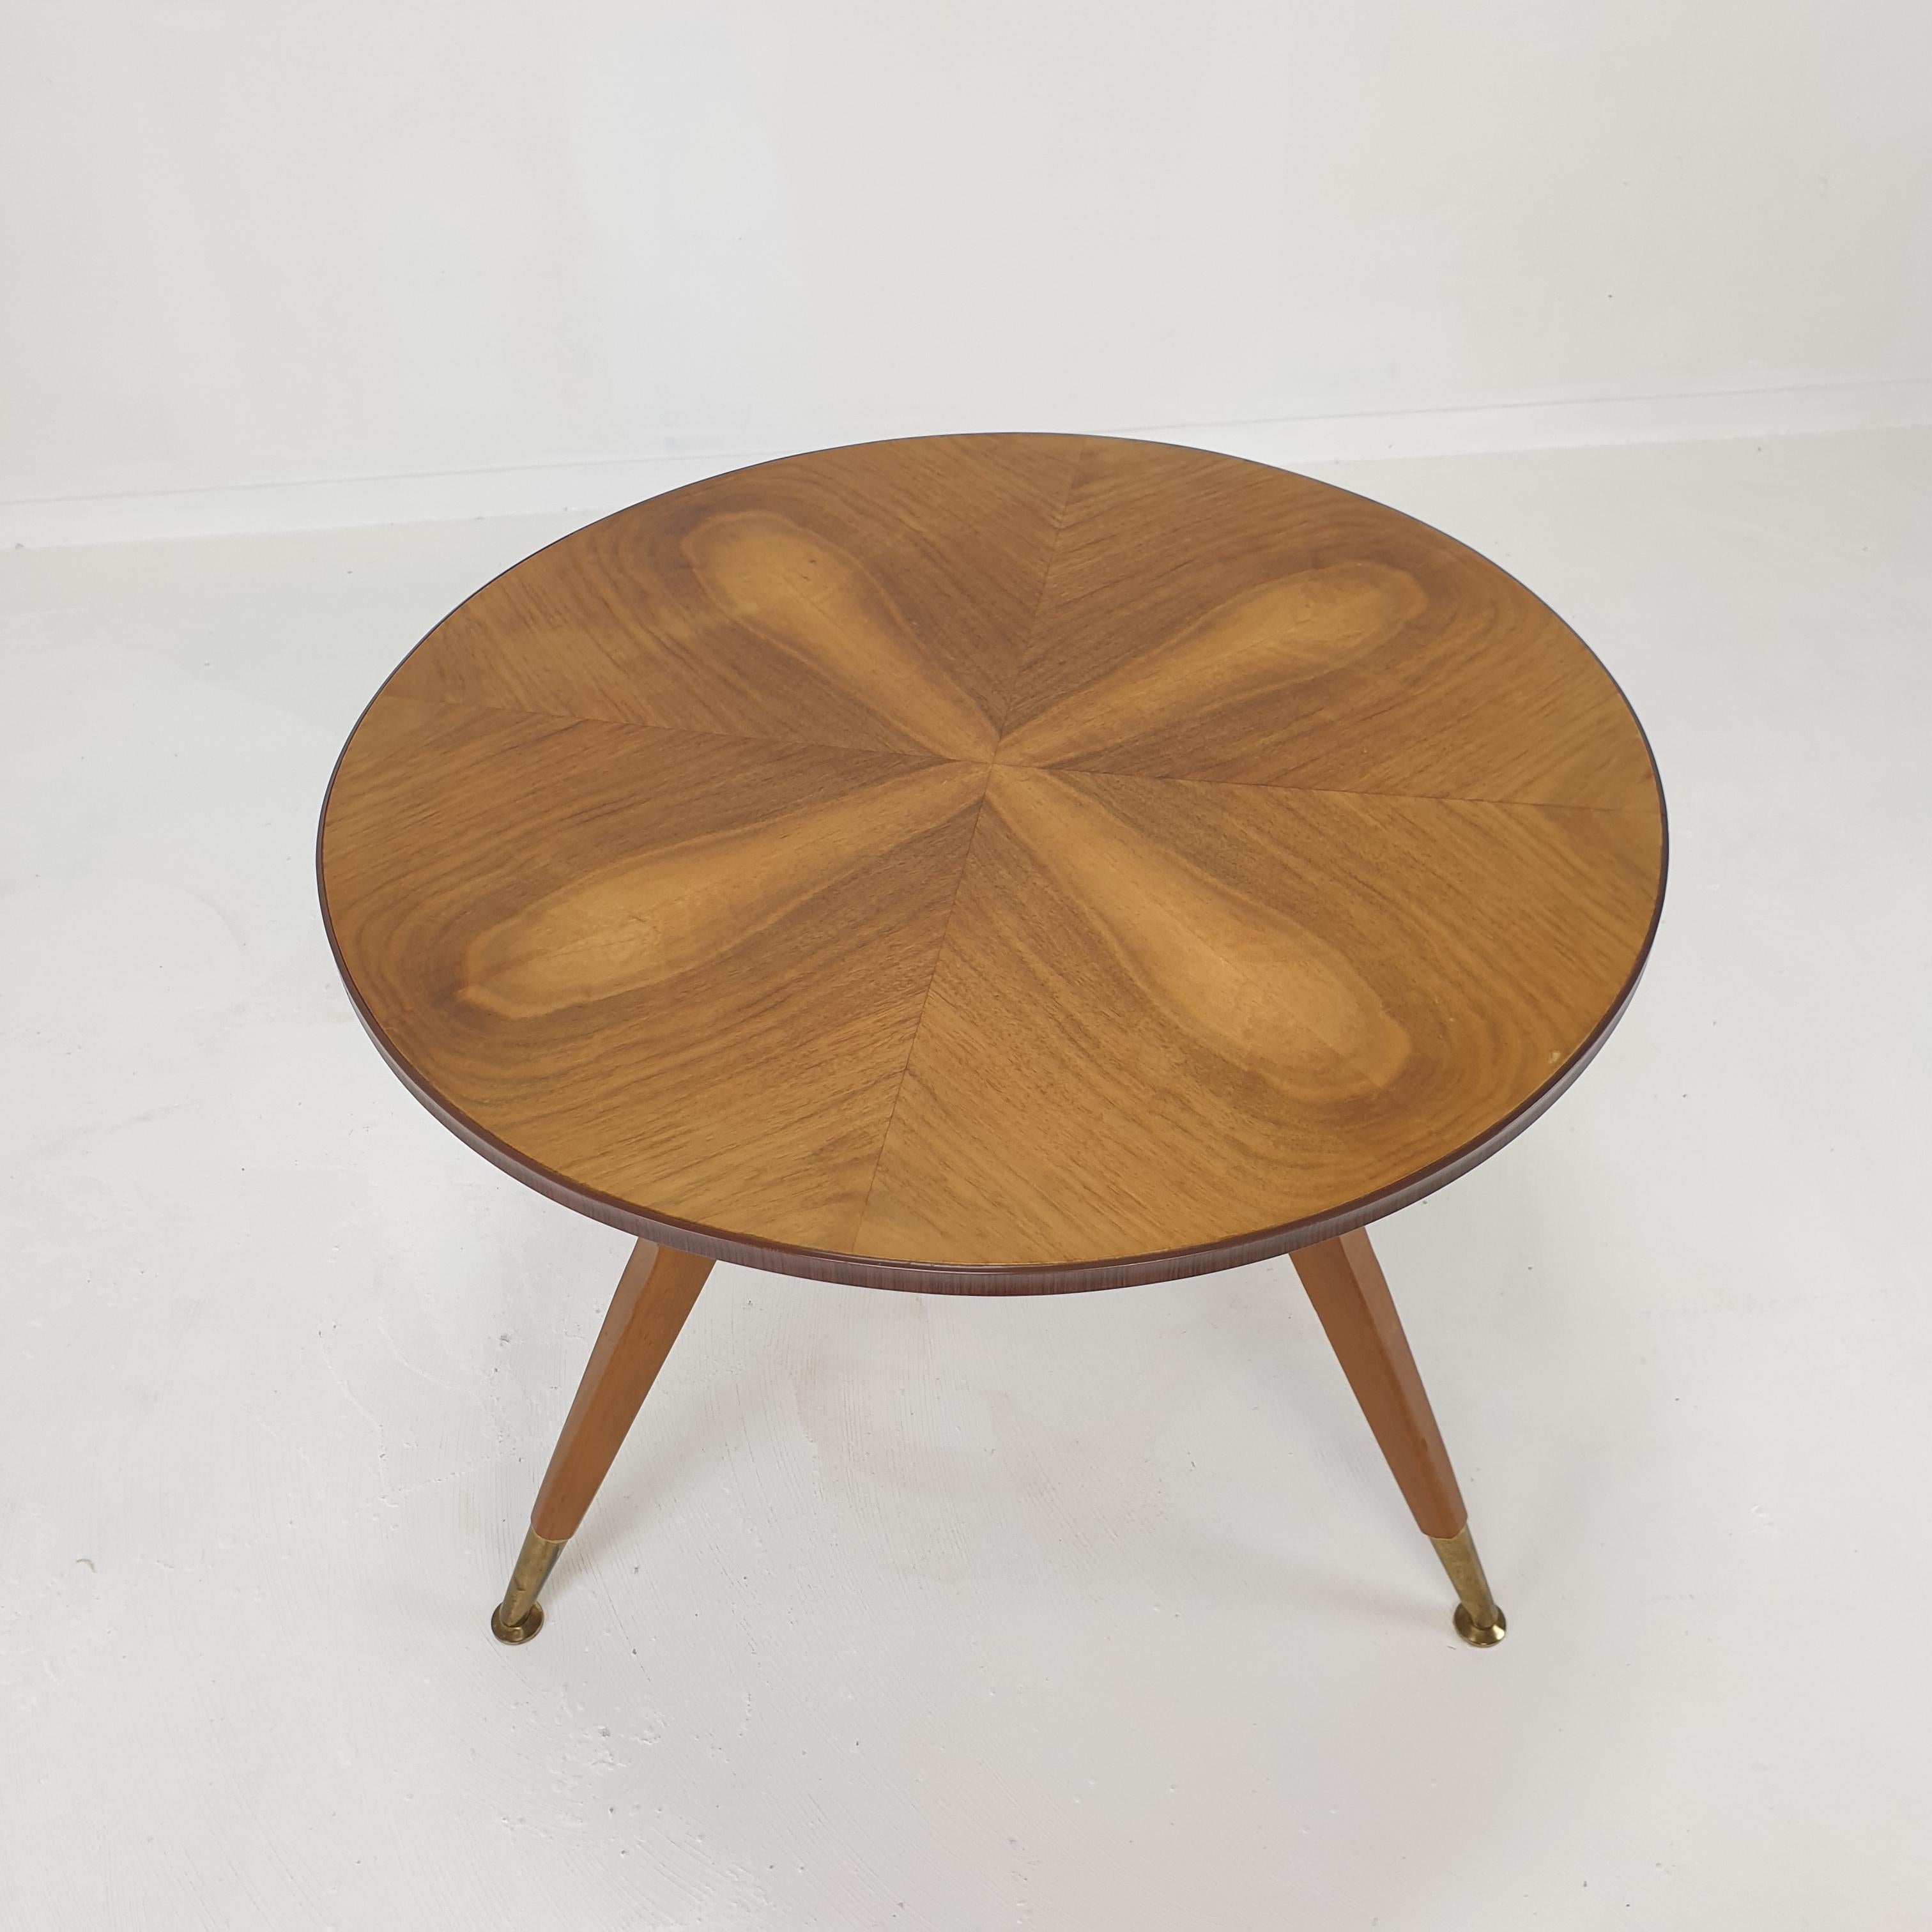 Midcentury Italian Wooden Coffee or Side Table with Brass Feet, 1960s For Sale 8